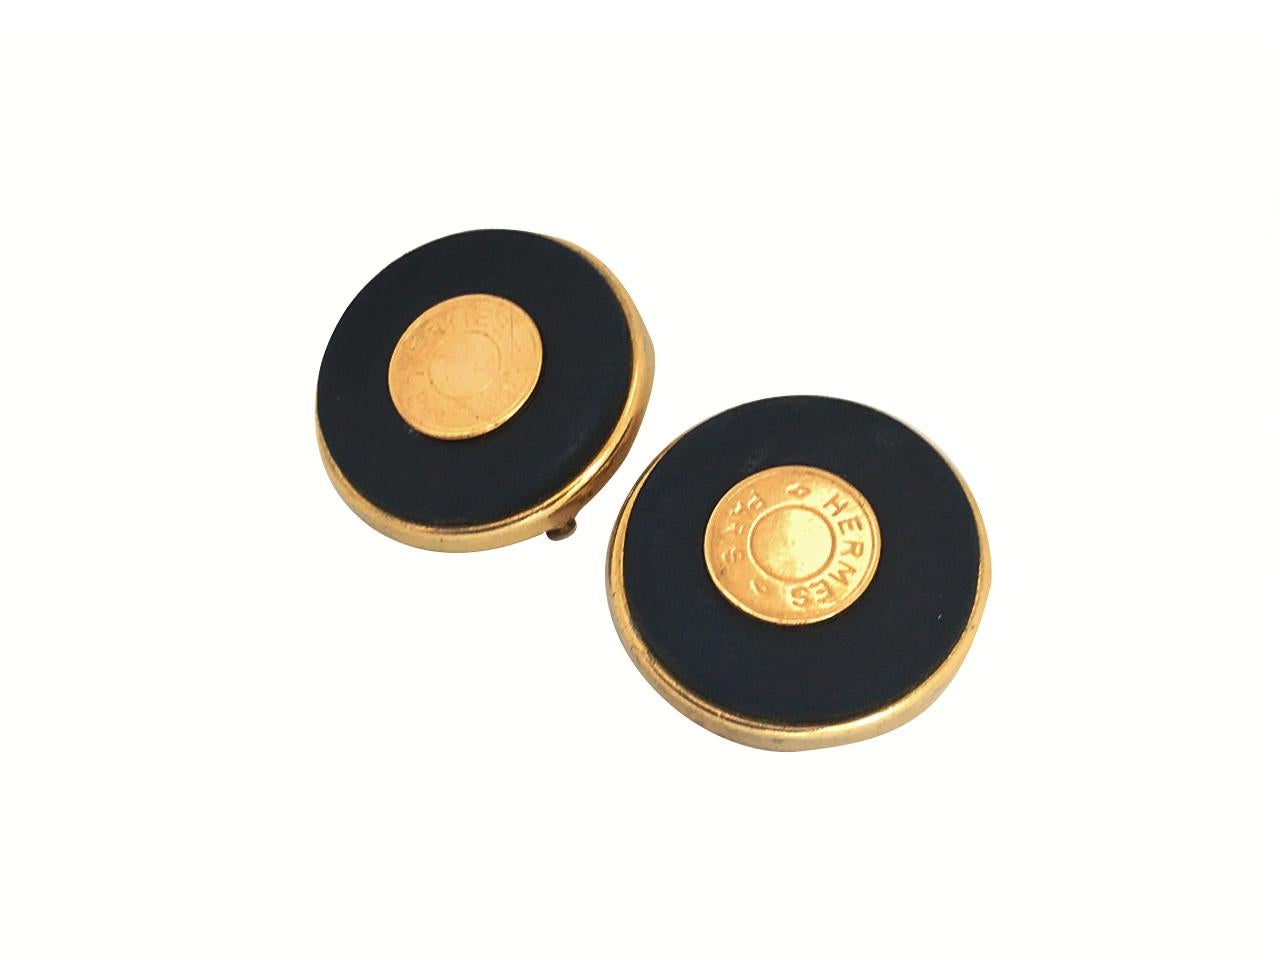 Hermes 24 Karat Gold Plated Black Leather Statement Clip on Earrings.

Hermes logo features around the centre of each earring.  Stamped 'Hermes Paris' on the reverse of each earring.

From the Sellier collection, these are highly collectable,